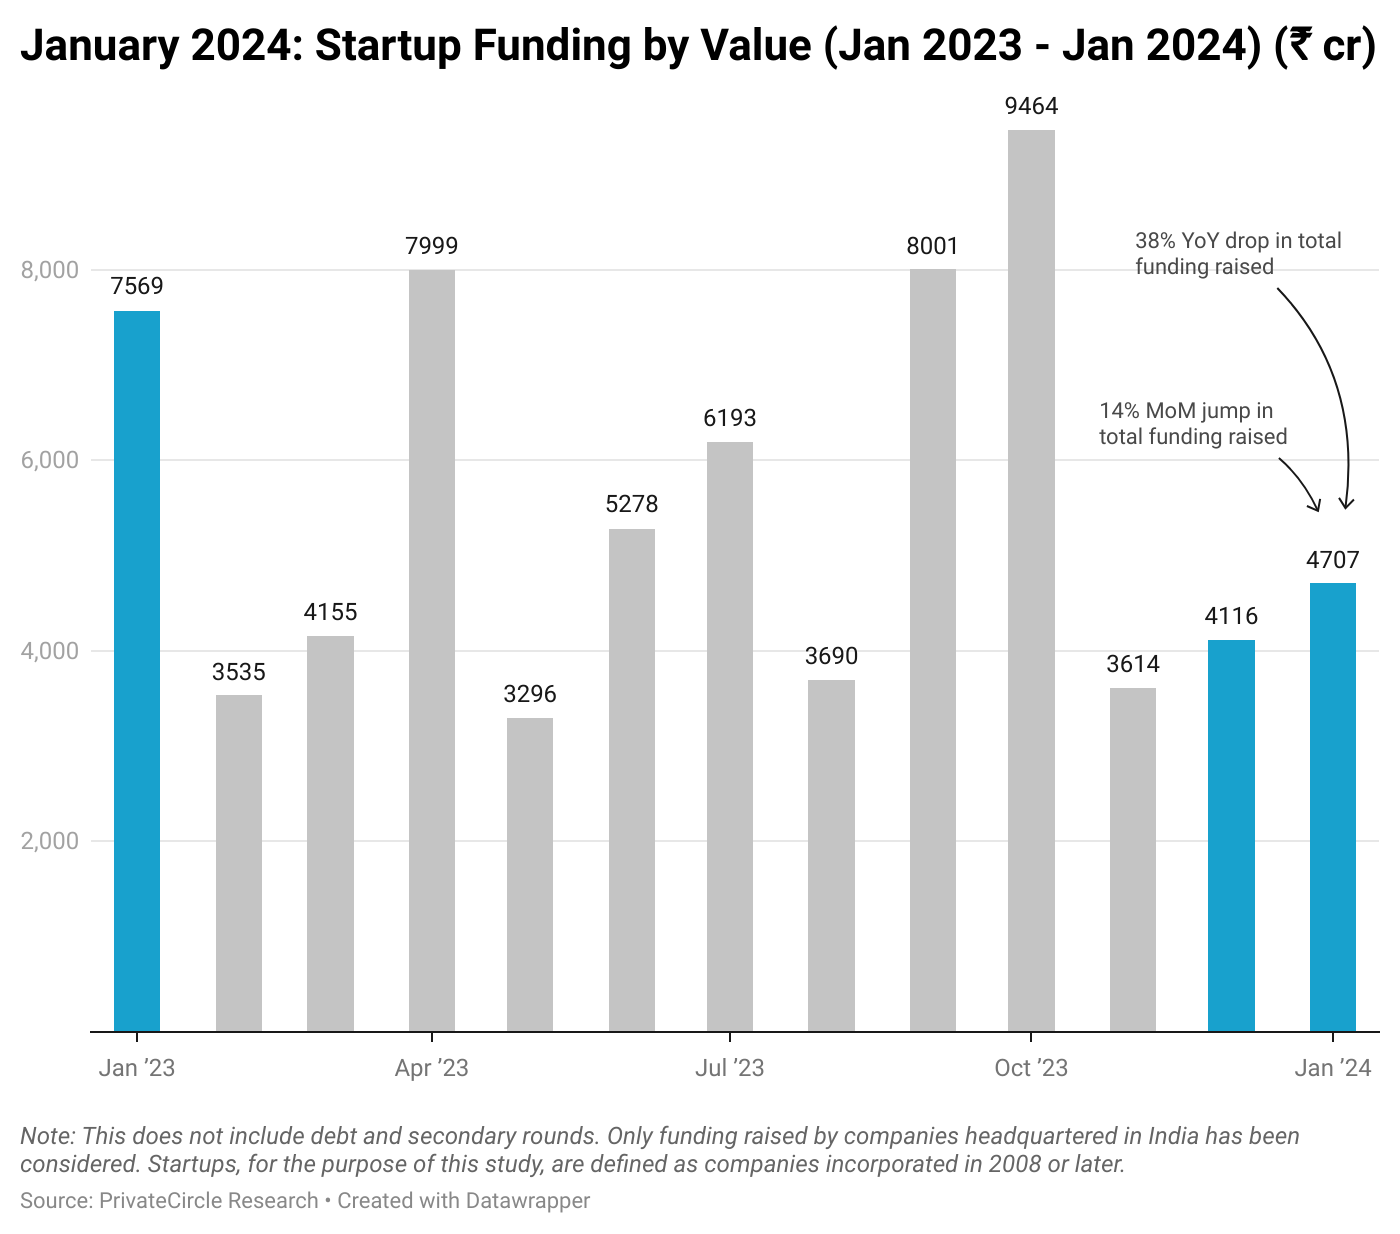 January 2024: Startup Funding by Value (Jan 2023 - Jan 2024) (₹ cr)

Startup funding saw about 14% jump in Jan 2024 as compared to previous month. However, the amount raised was 38% lower than the funding raised in January last year.